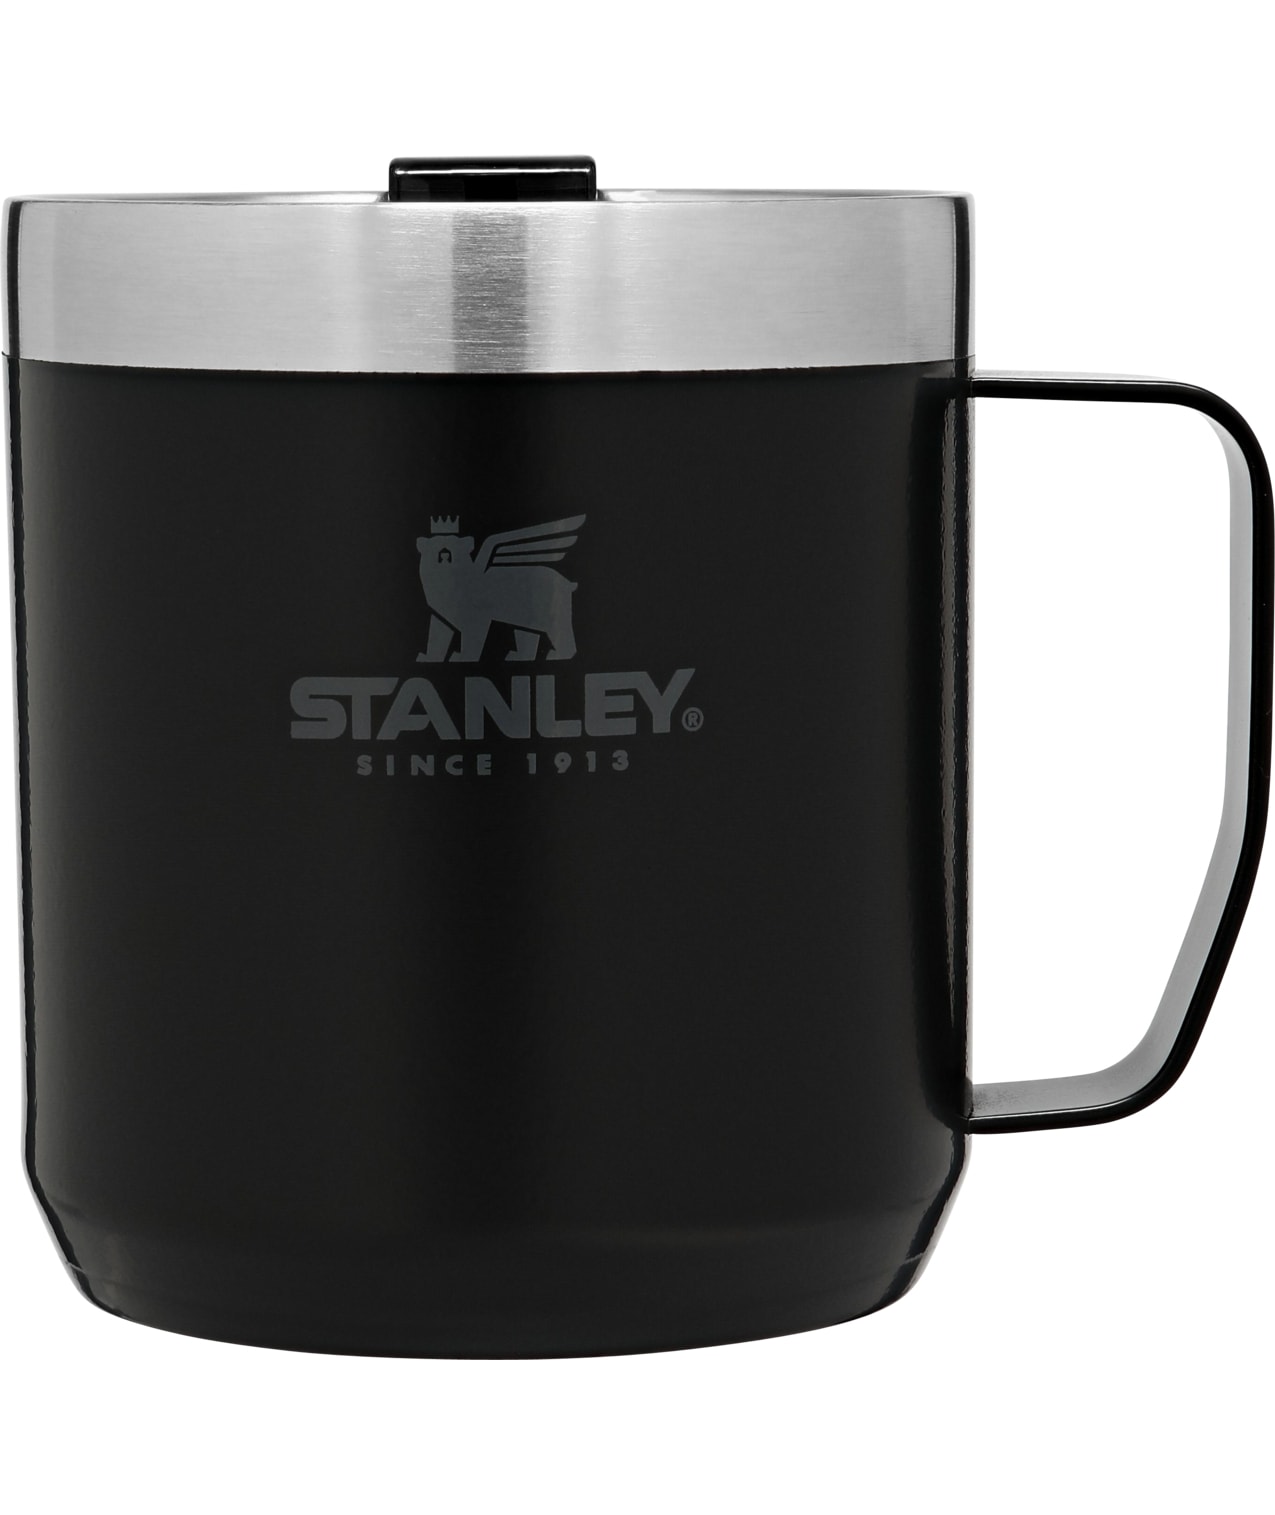  Stanley Legendary Camp Mug, 12oz, Stainless Steel Vacuum  Insulated Coffee Mug with Drink-Thru Lid (Green/Matte Black) : Sports &  Outdoors